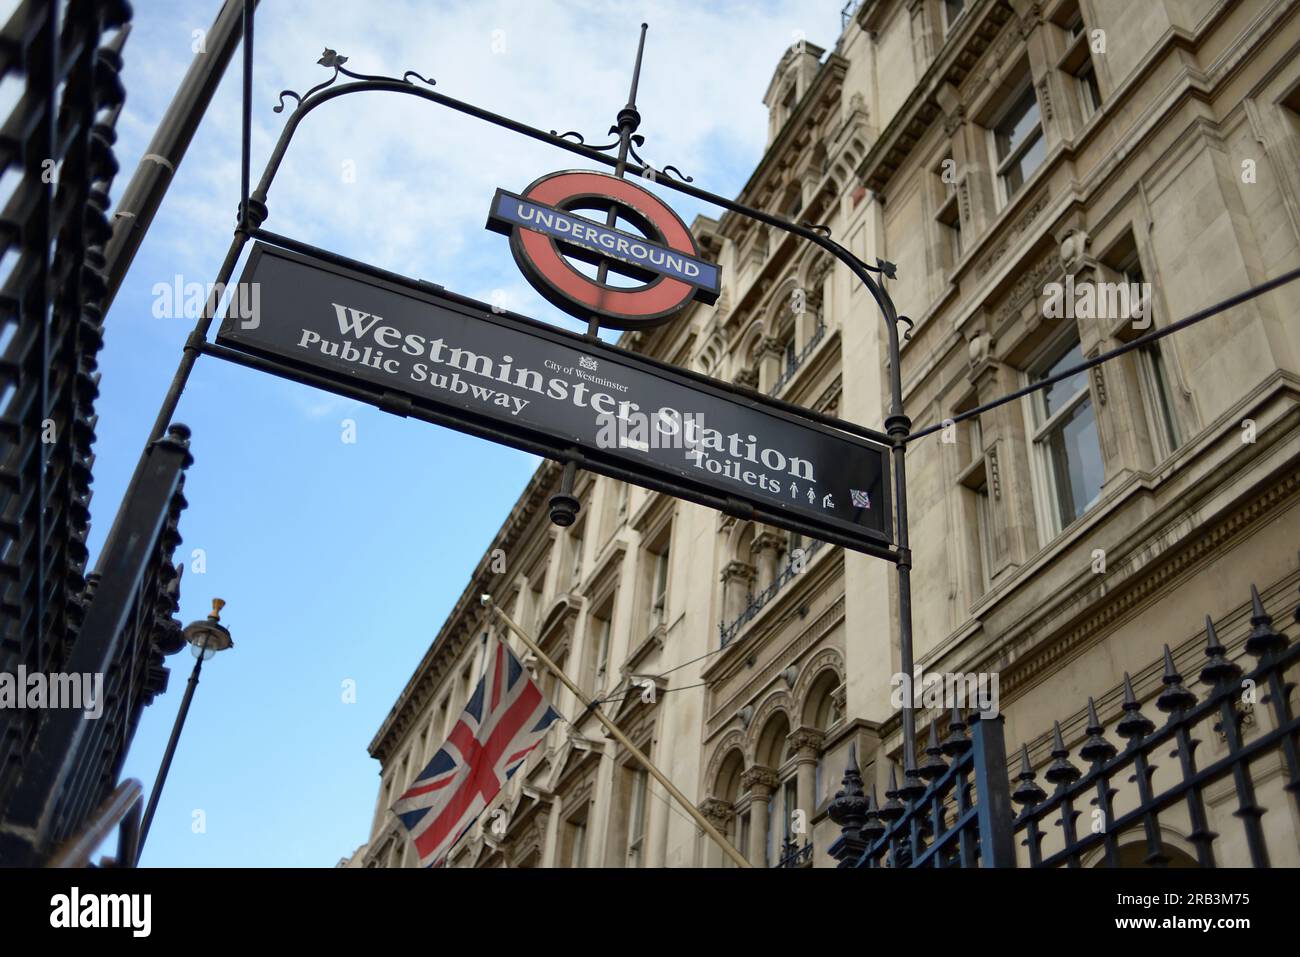 Entrance to Westminster underground station in the centre of London Stock Photo